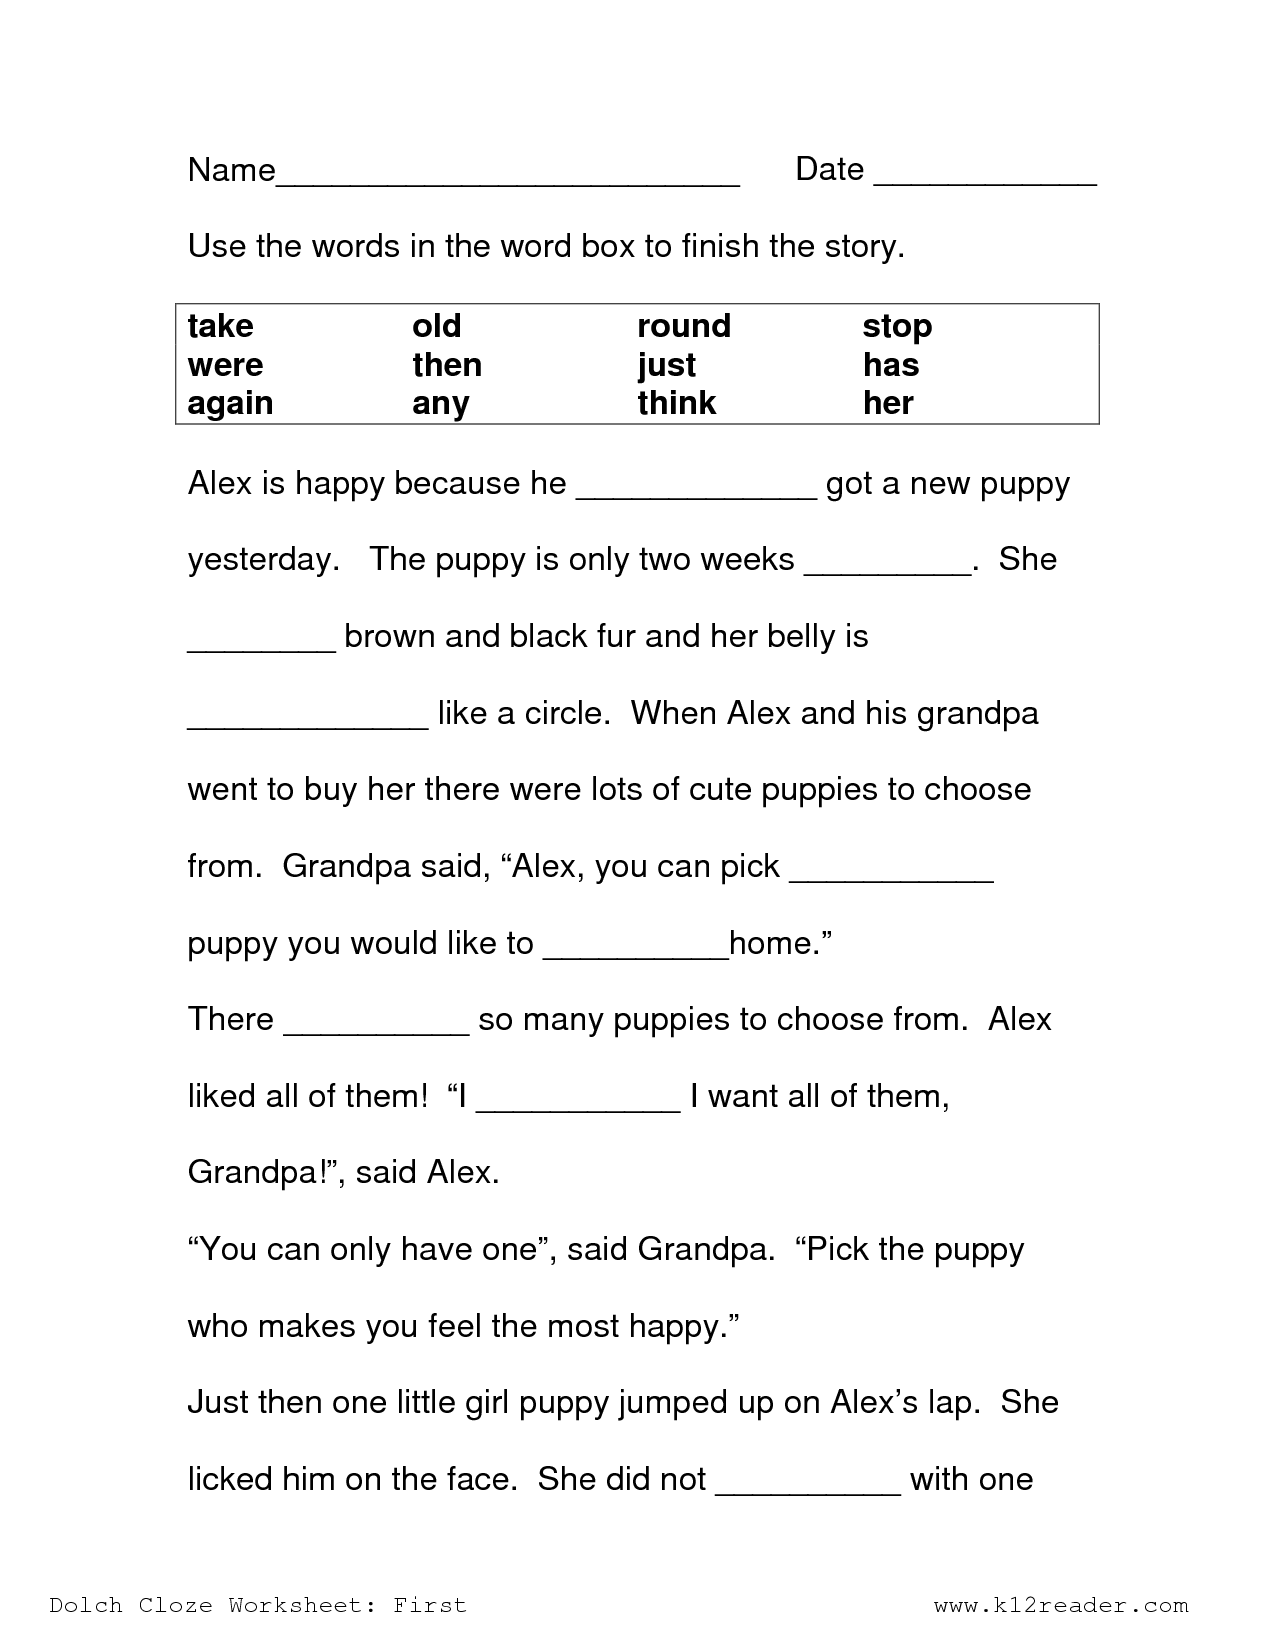 18-best-images-of-cloze-worksheets-first-cloze-reading-worksheets